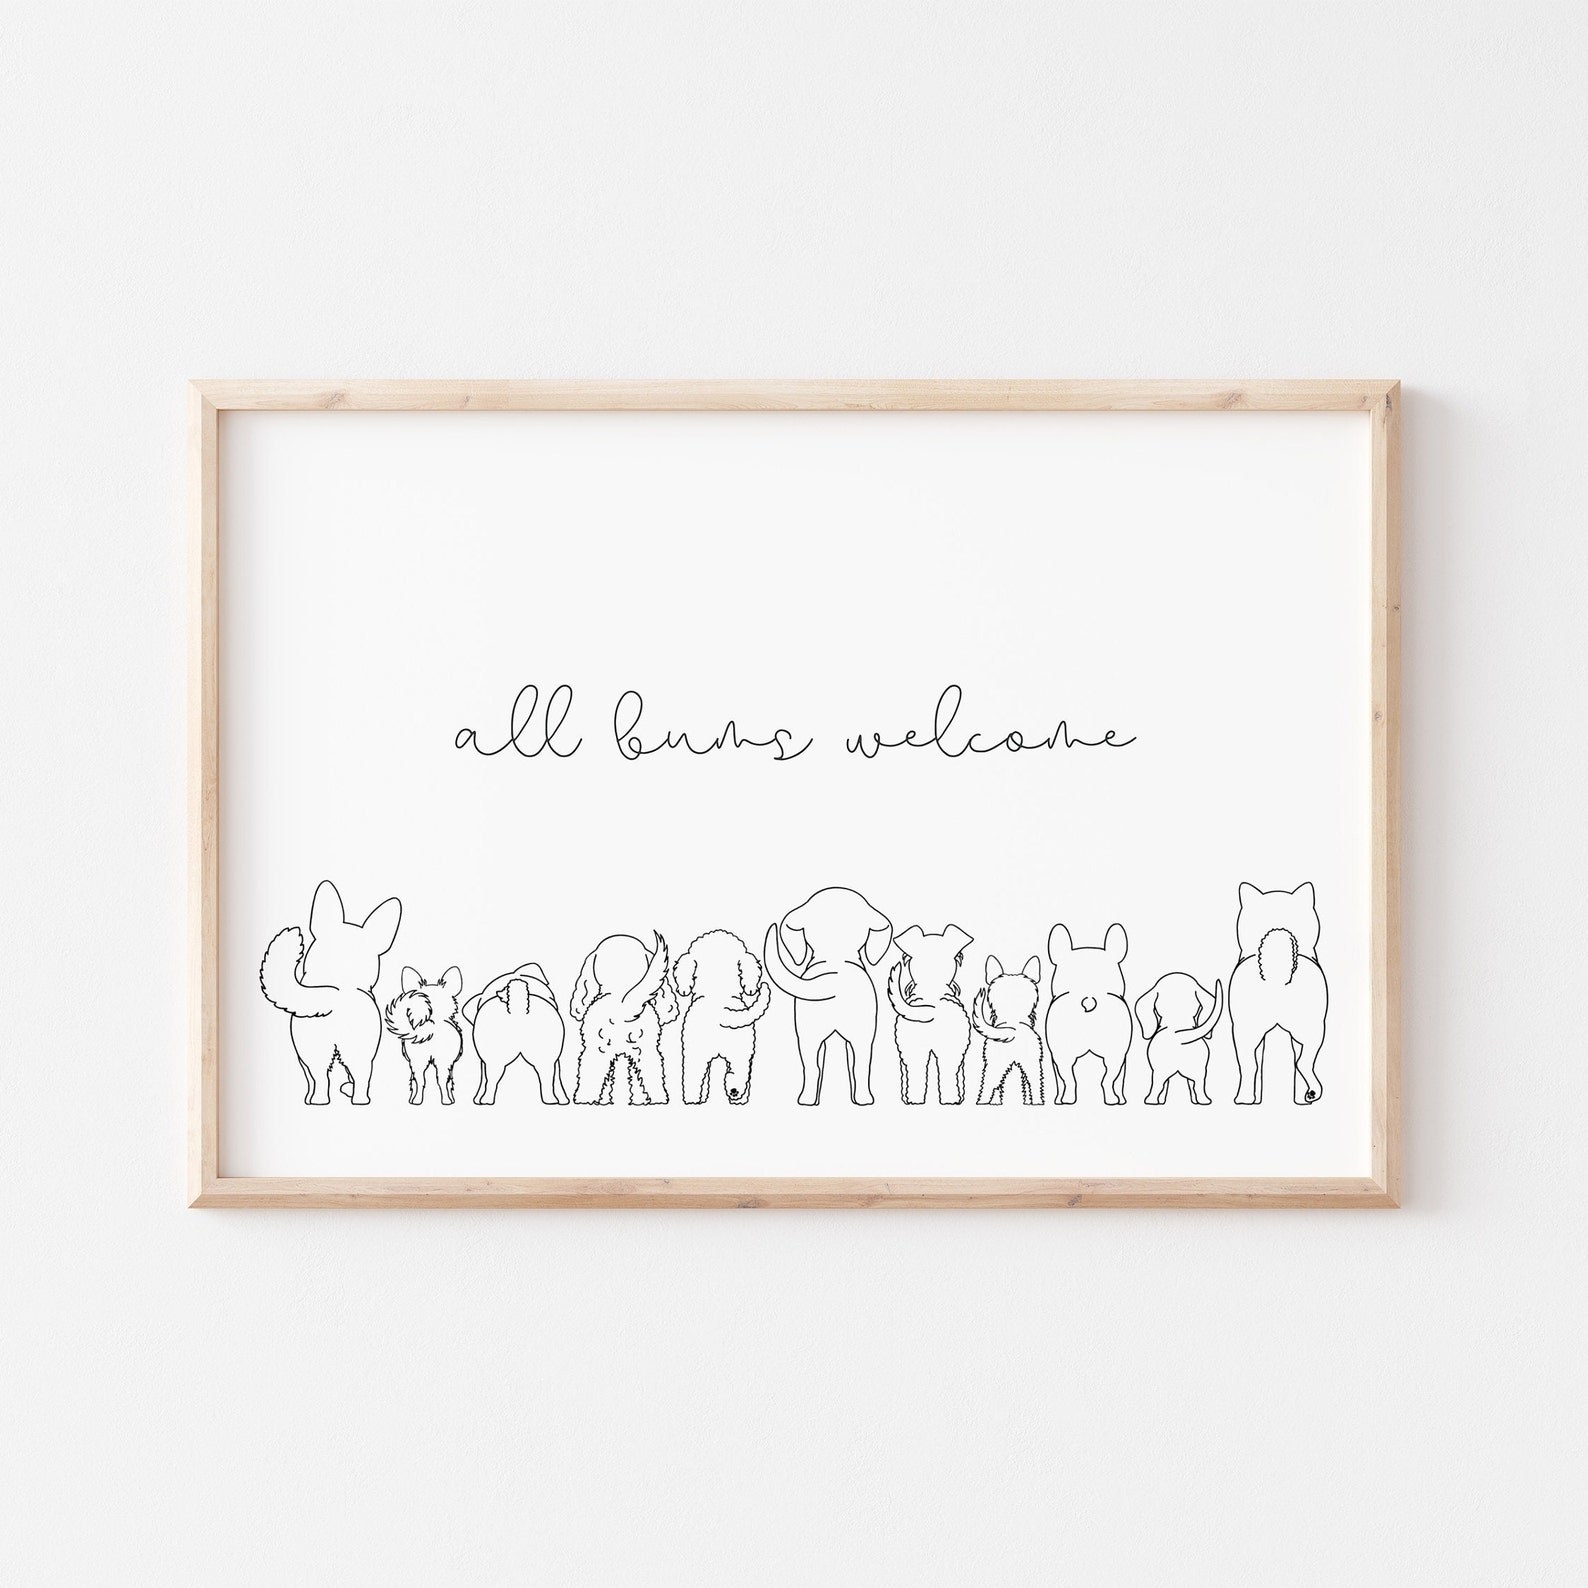 A framed print that shows a row of dogs&#x27; backsides with text: &quot;all buns welcome&quot;